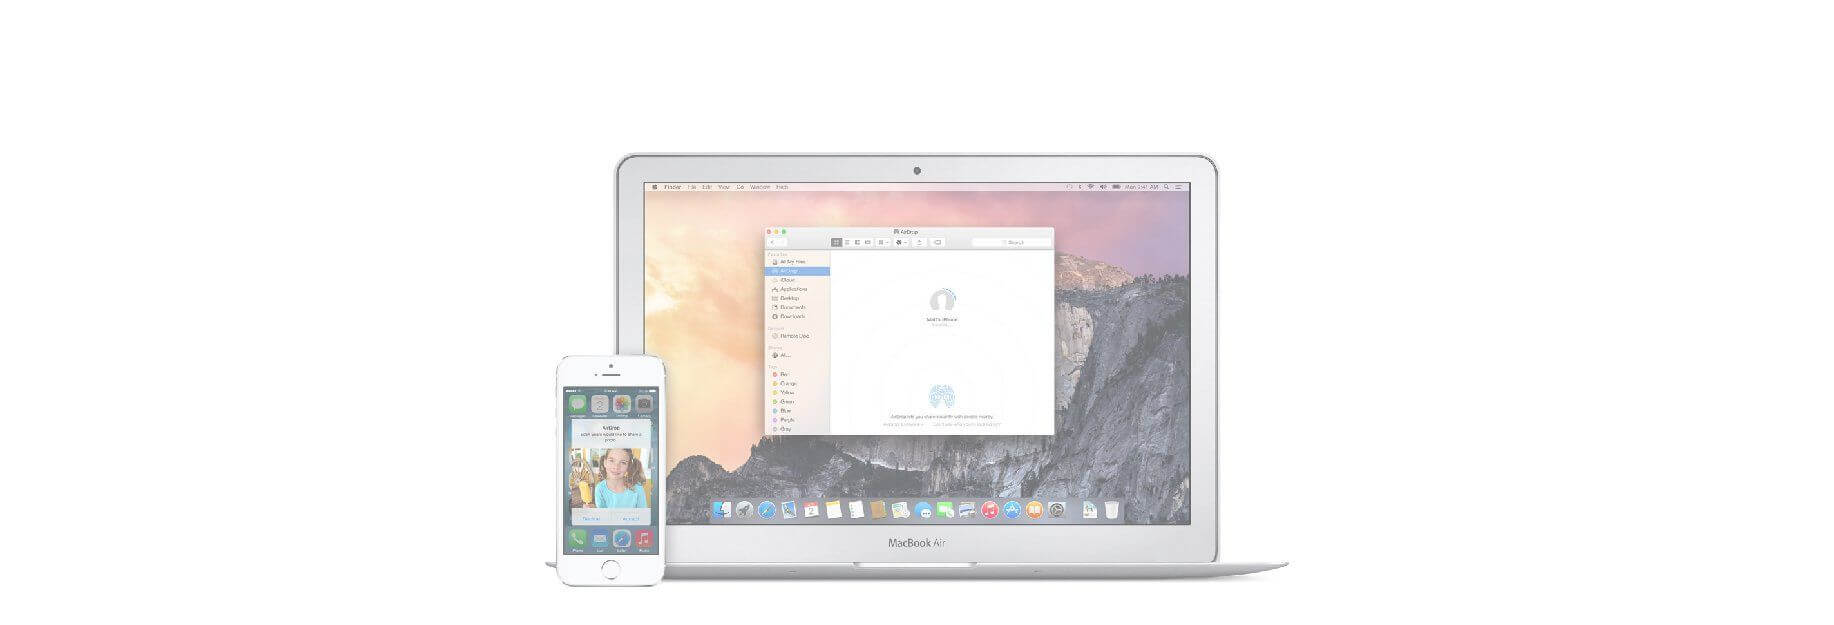 How to add an AirDrop shortcut to the Mac  Dock for quicker access